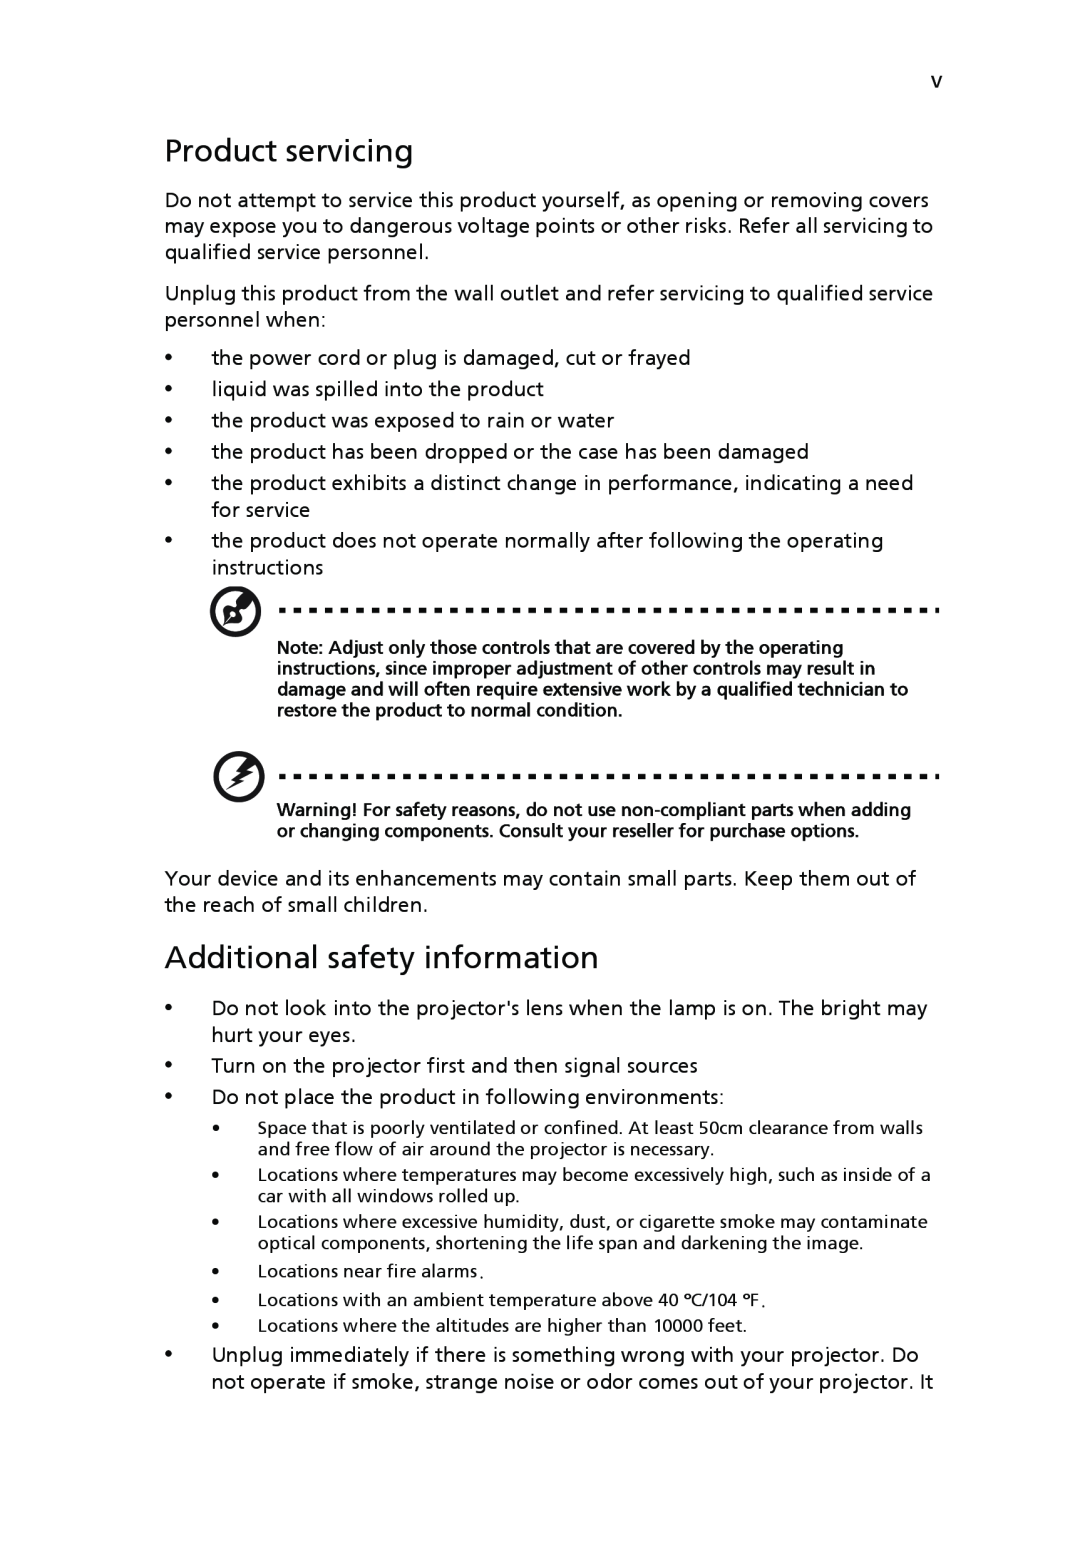 Acer P5270, P1265 manual Product servicing, Additional safety information 